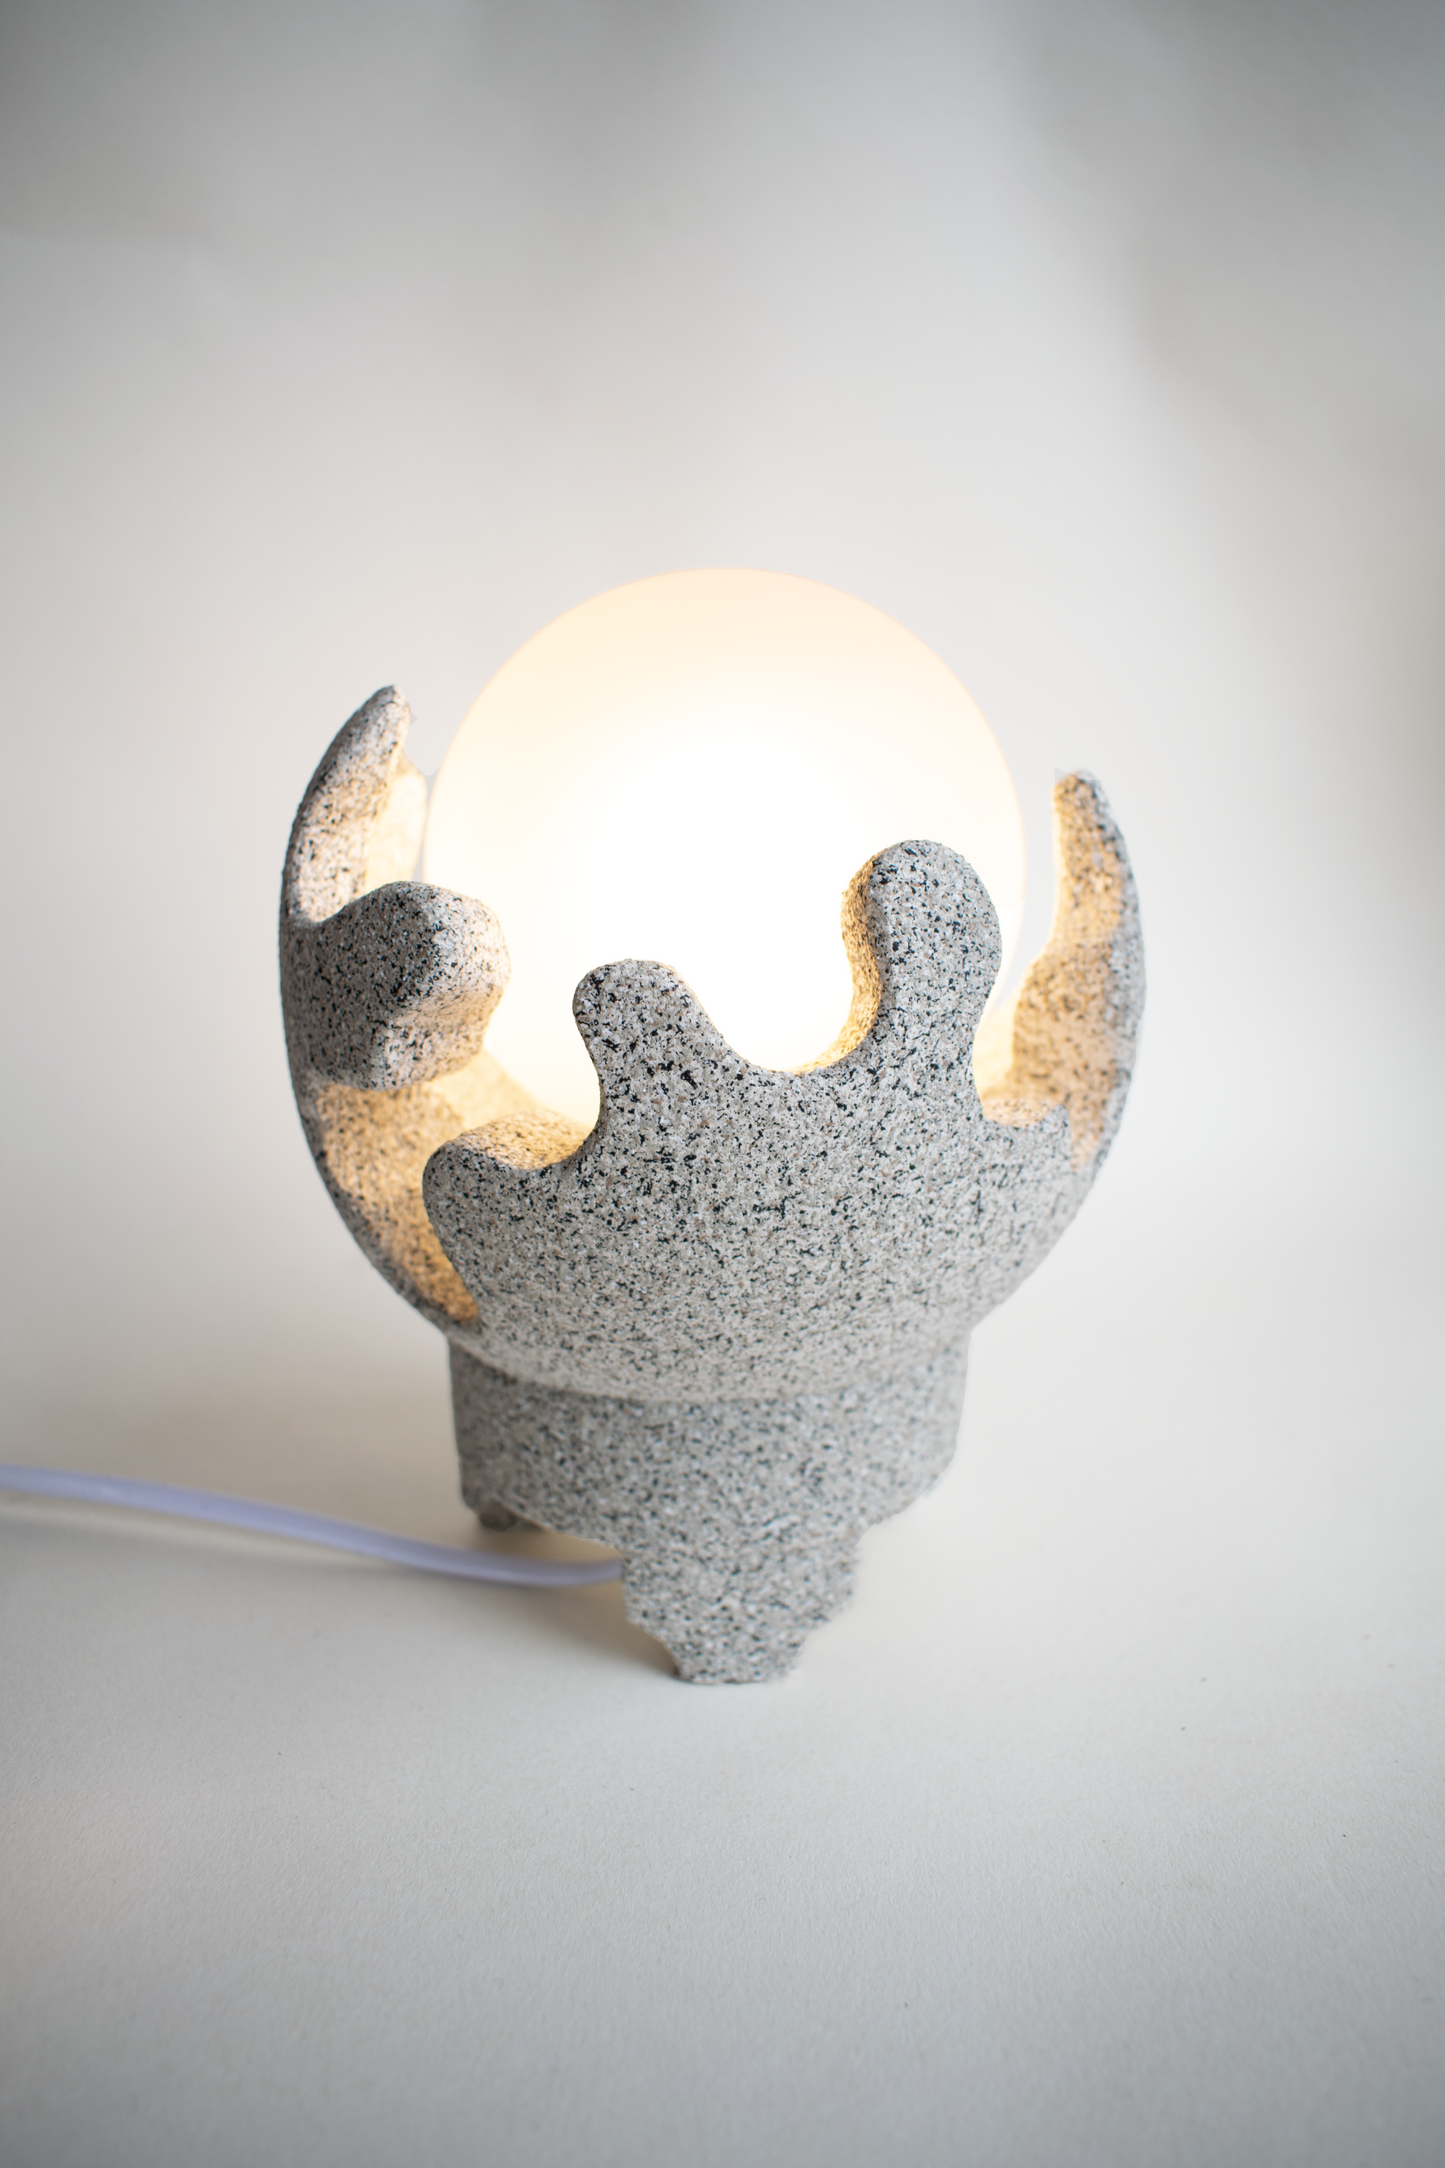 Grey Cora - Small Modern Table Lamp with Curvy Textured Base and Round Glass Light Shade, Dimmable Bedside Desk Lamp